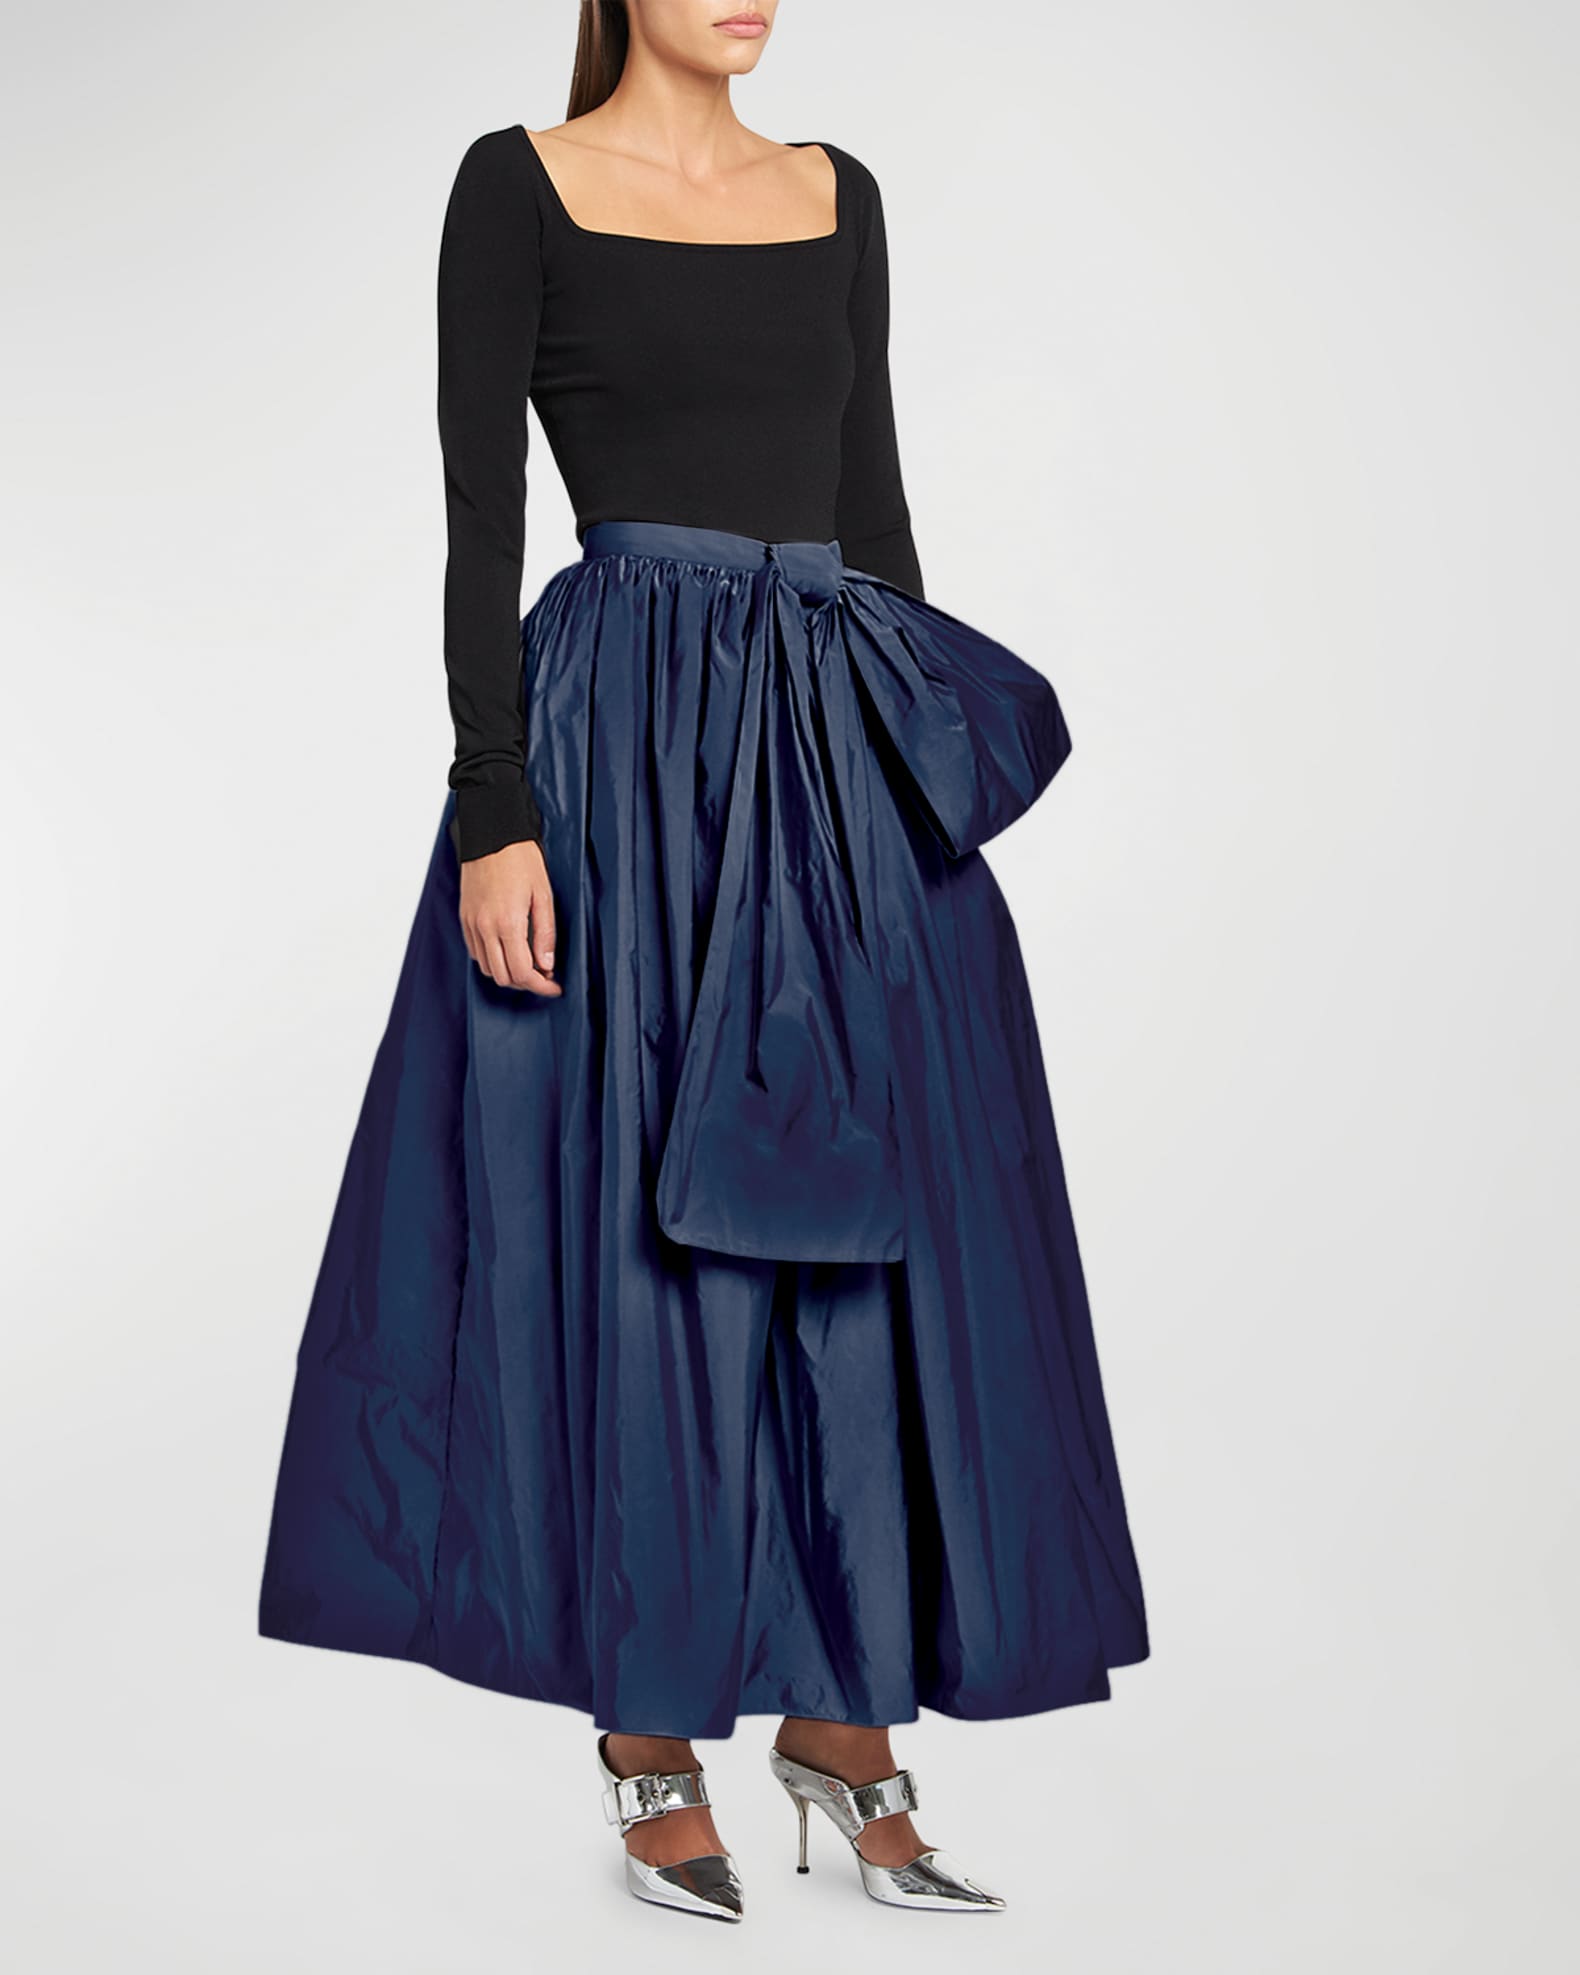 Alexander McQueen Ruched Midi Skirt with Bow Detail | Neiman Marcus